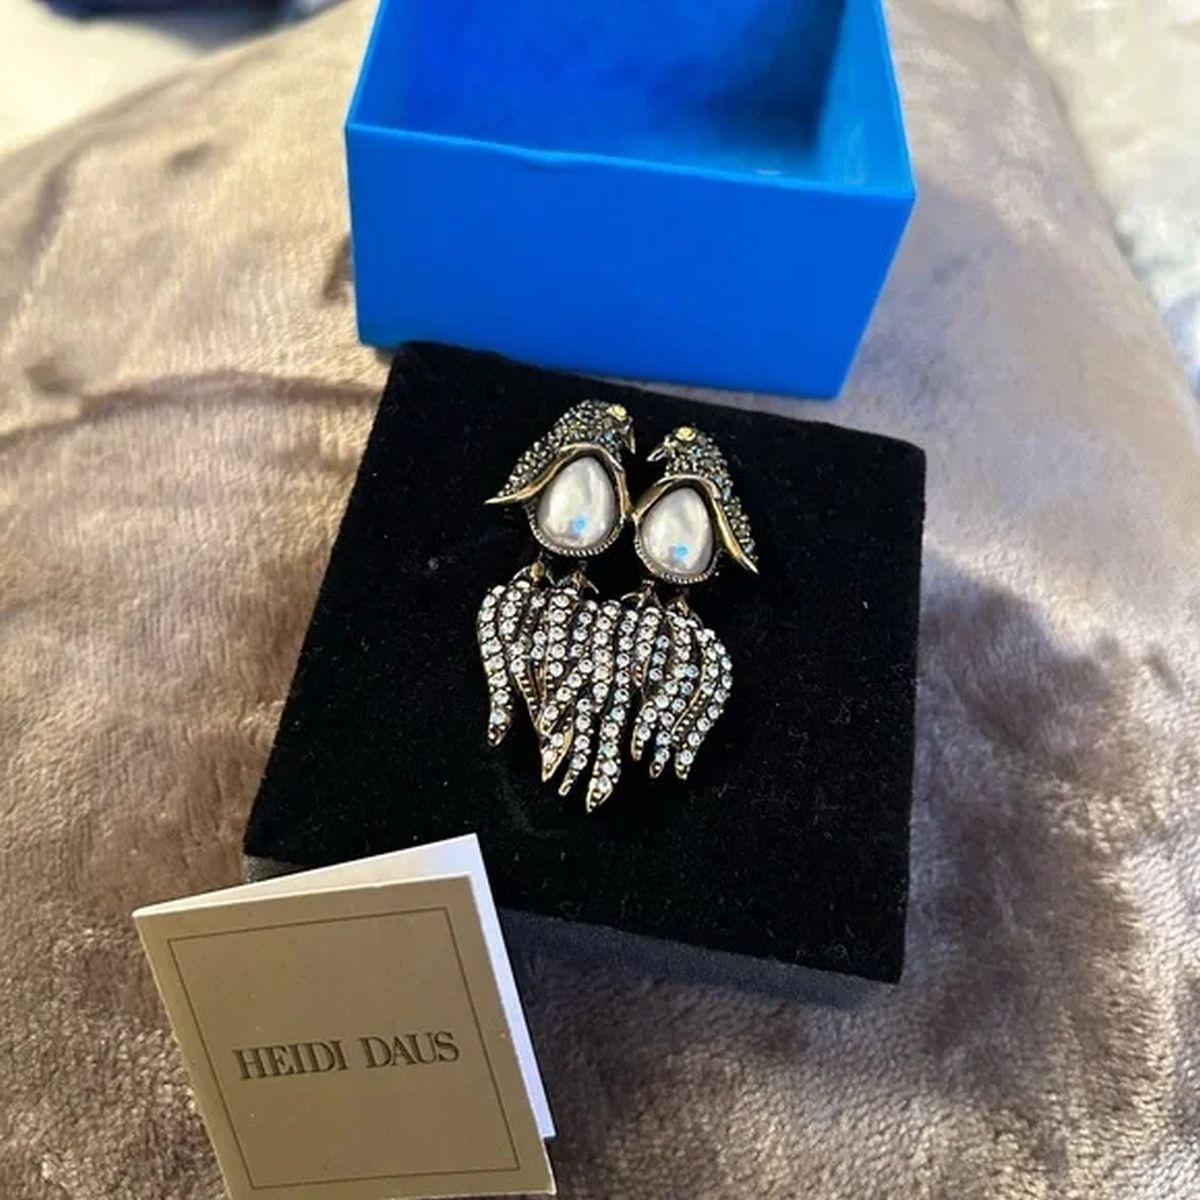 Simply Beautiful! Heidi Daus Designer Signed Swarovski Crystal and Pearl Double Birds Brooch. Hand set with Faux Pearls and adorned with Sparking Swarovski Crystals. Hand crafted in Gold-tone mounting. Measuring approx. 2.25